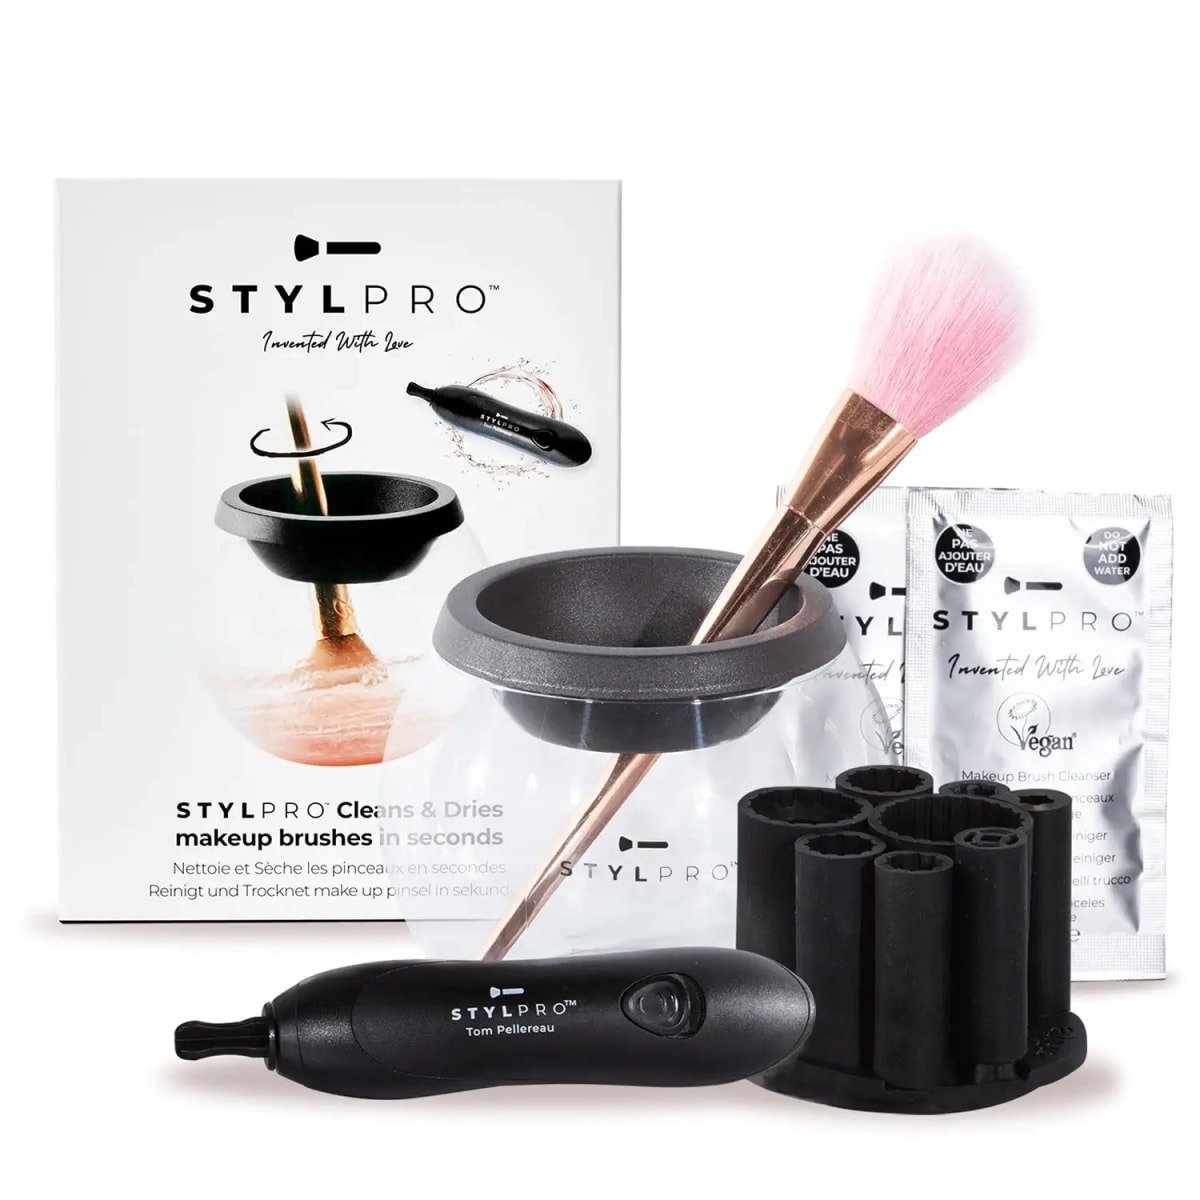 Original Gift Set Kit: Electric Makeup Brush Cleaner and Dryer Machine with 8 Brush Collars